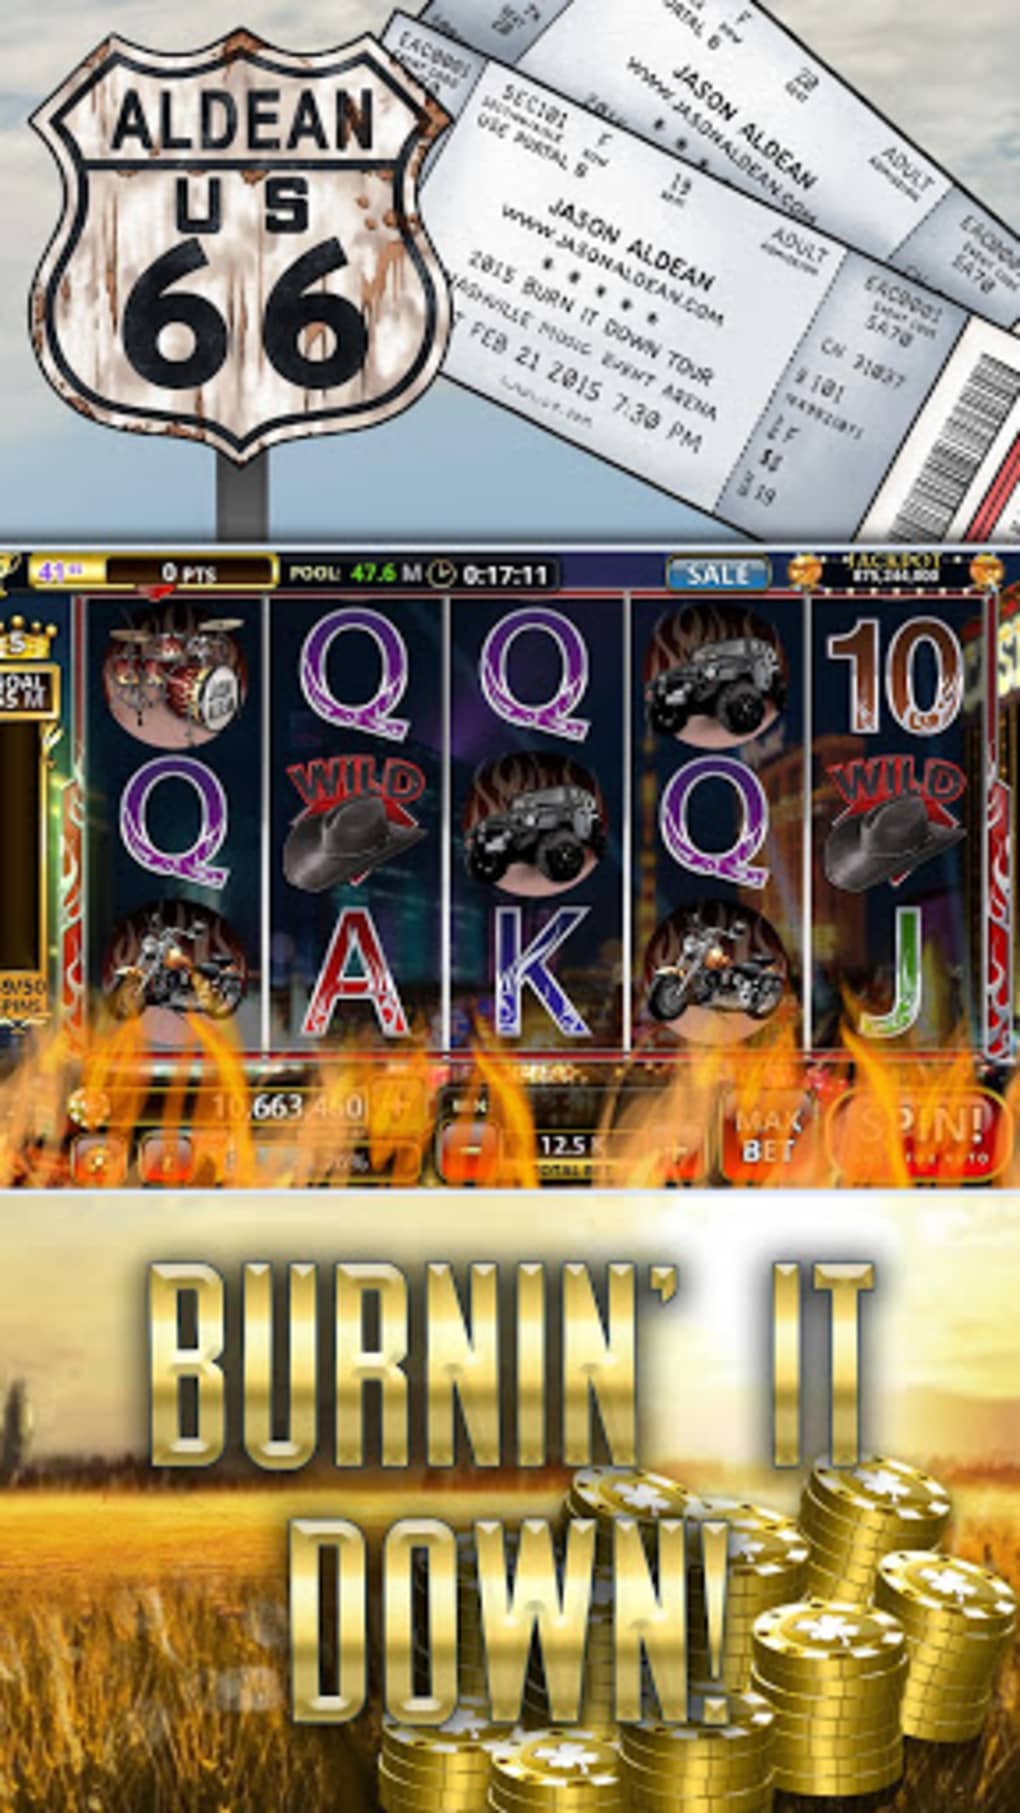 Adults Only Slot Machines For Android